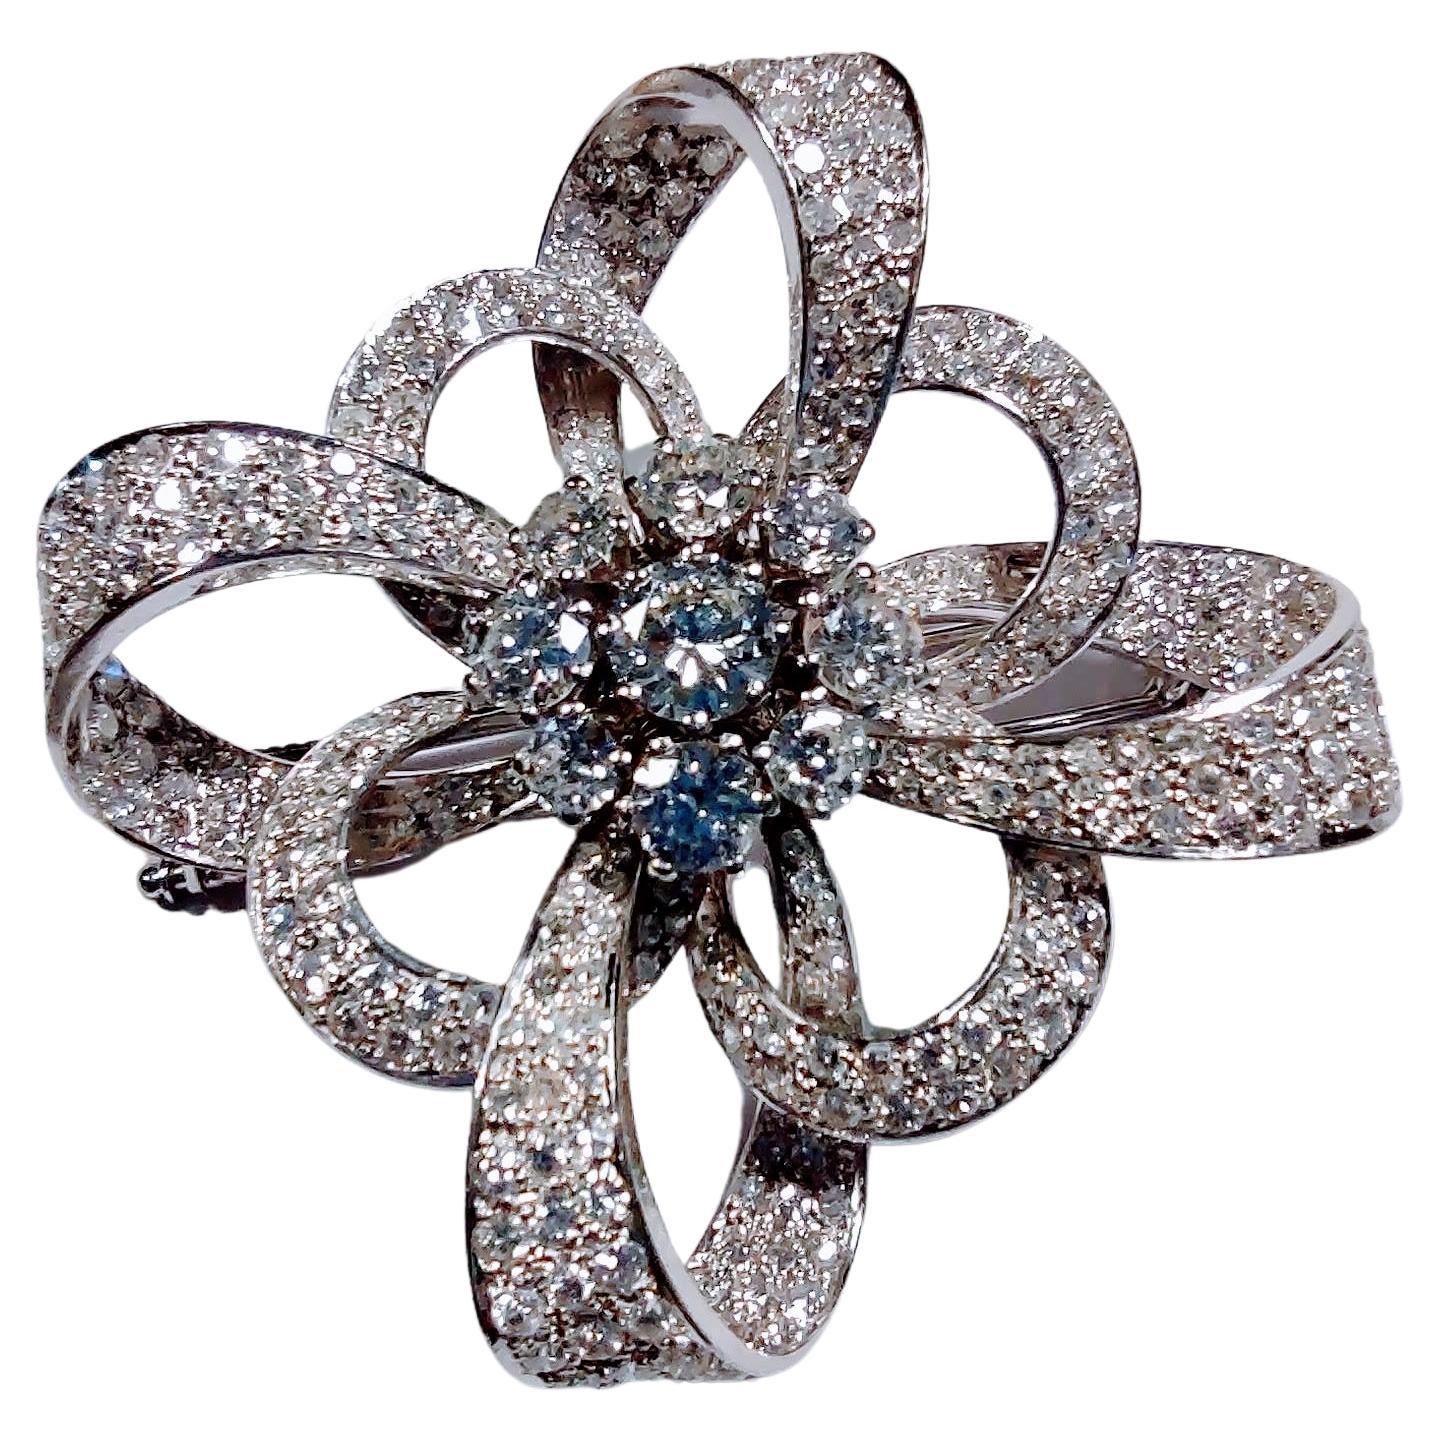 Magnificent Tremblant Brooch In/Out White Gold 18 karat with double needle on the back the central cluster a  bolt system which allows a subtle movement. 
Set in pave total weight Diamonds 10.13 cts.
View Certificate.
This item is in perfect